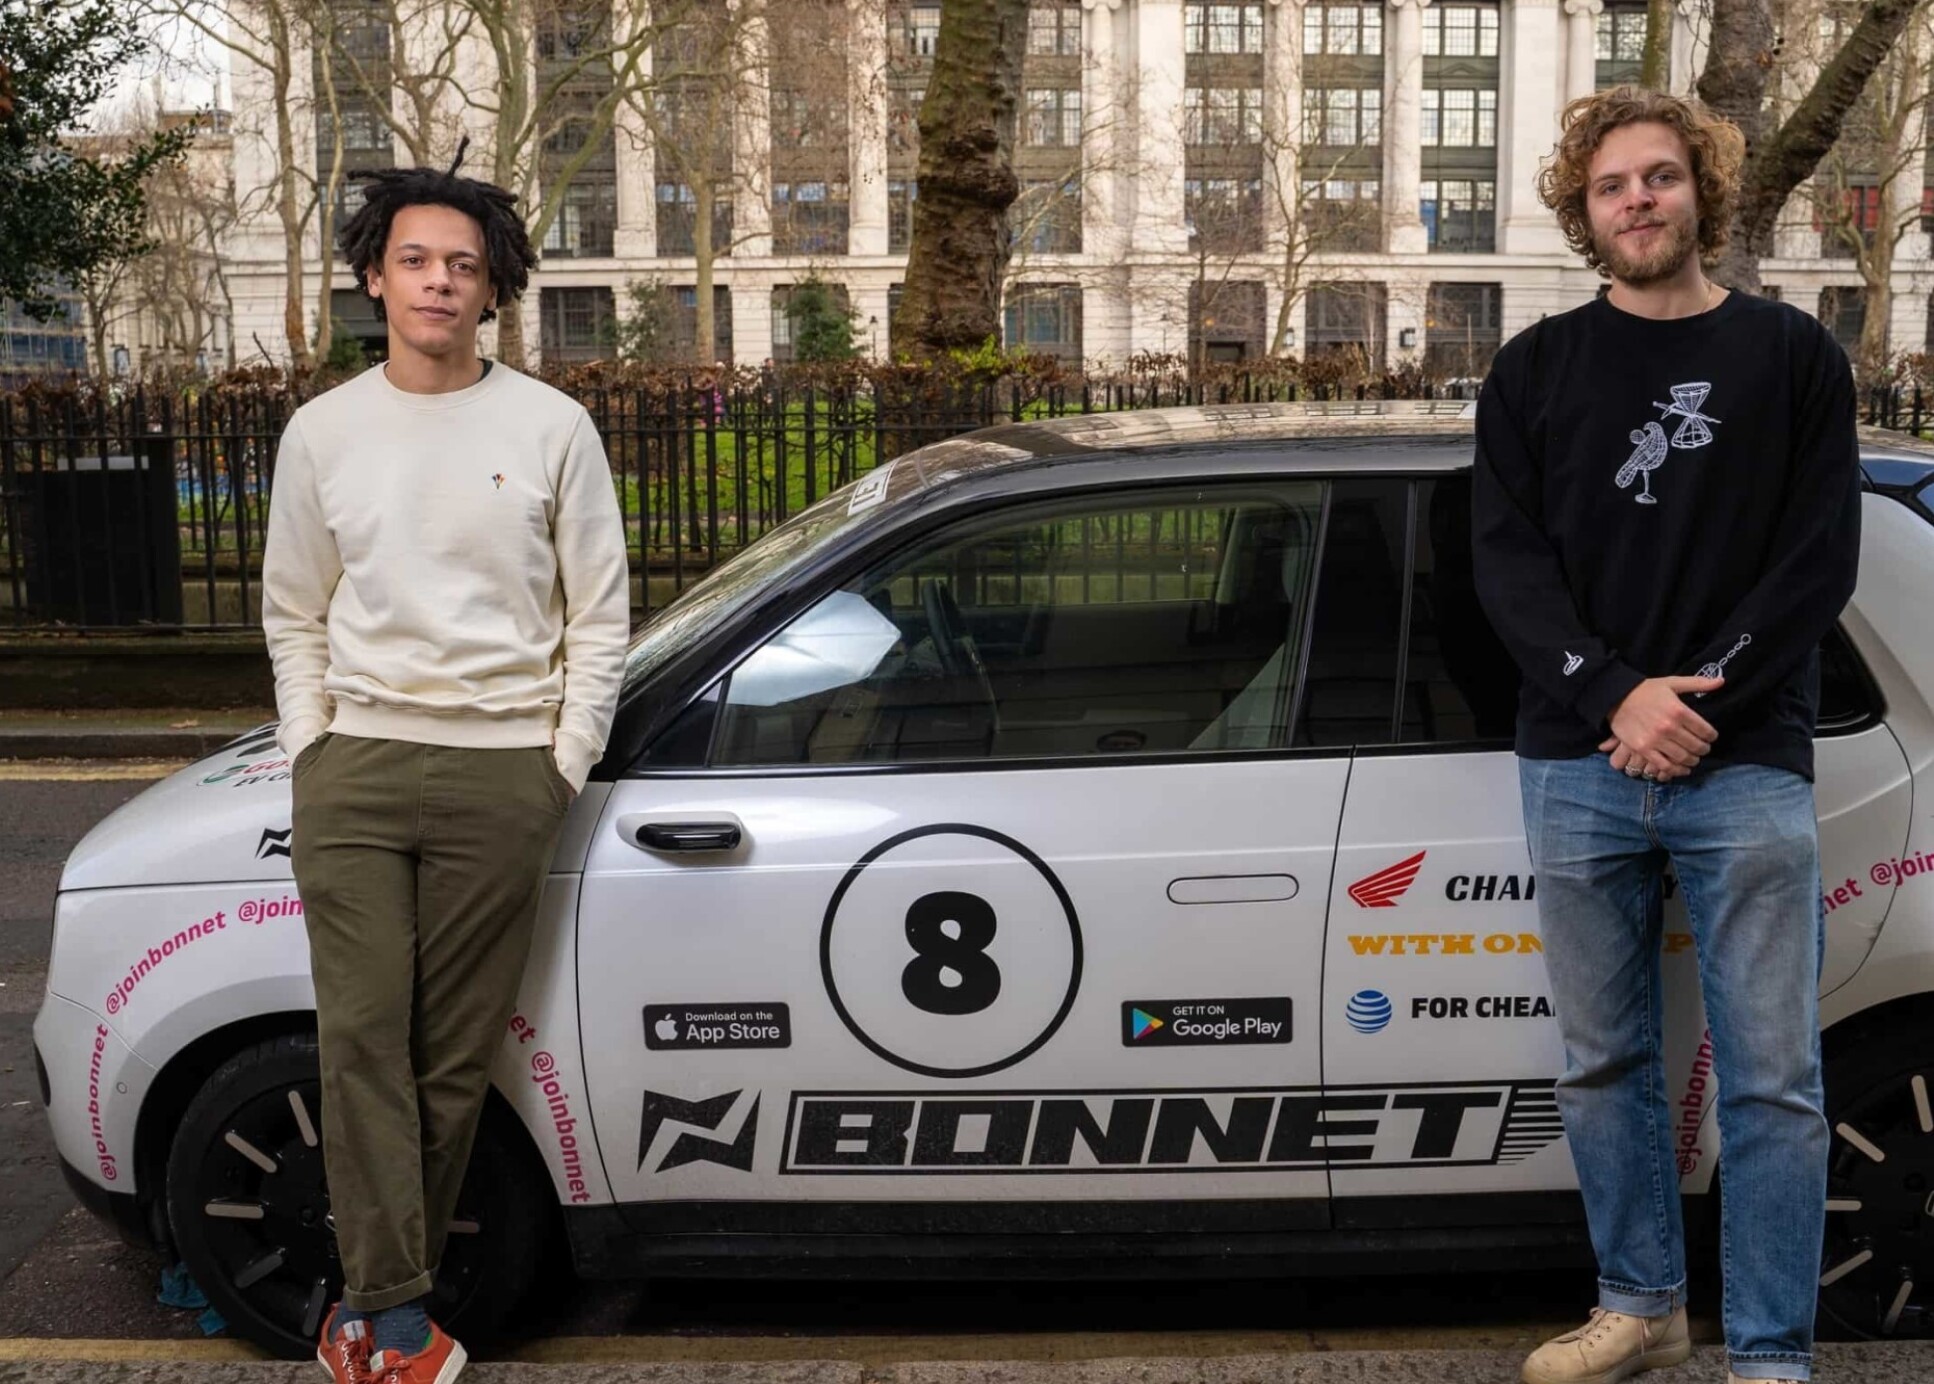 Bonnet co-founders with a car